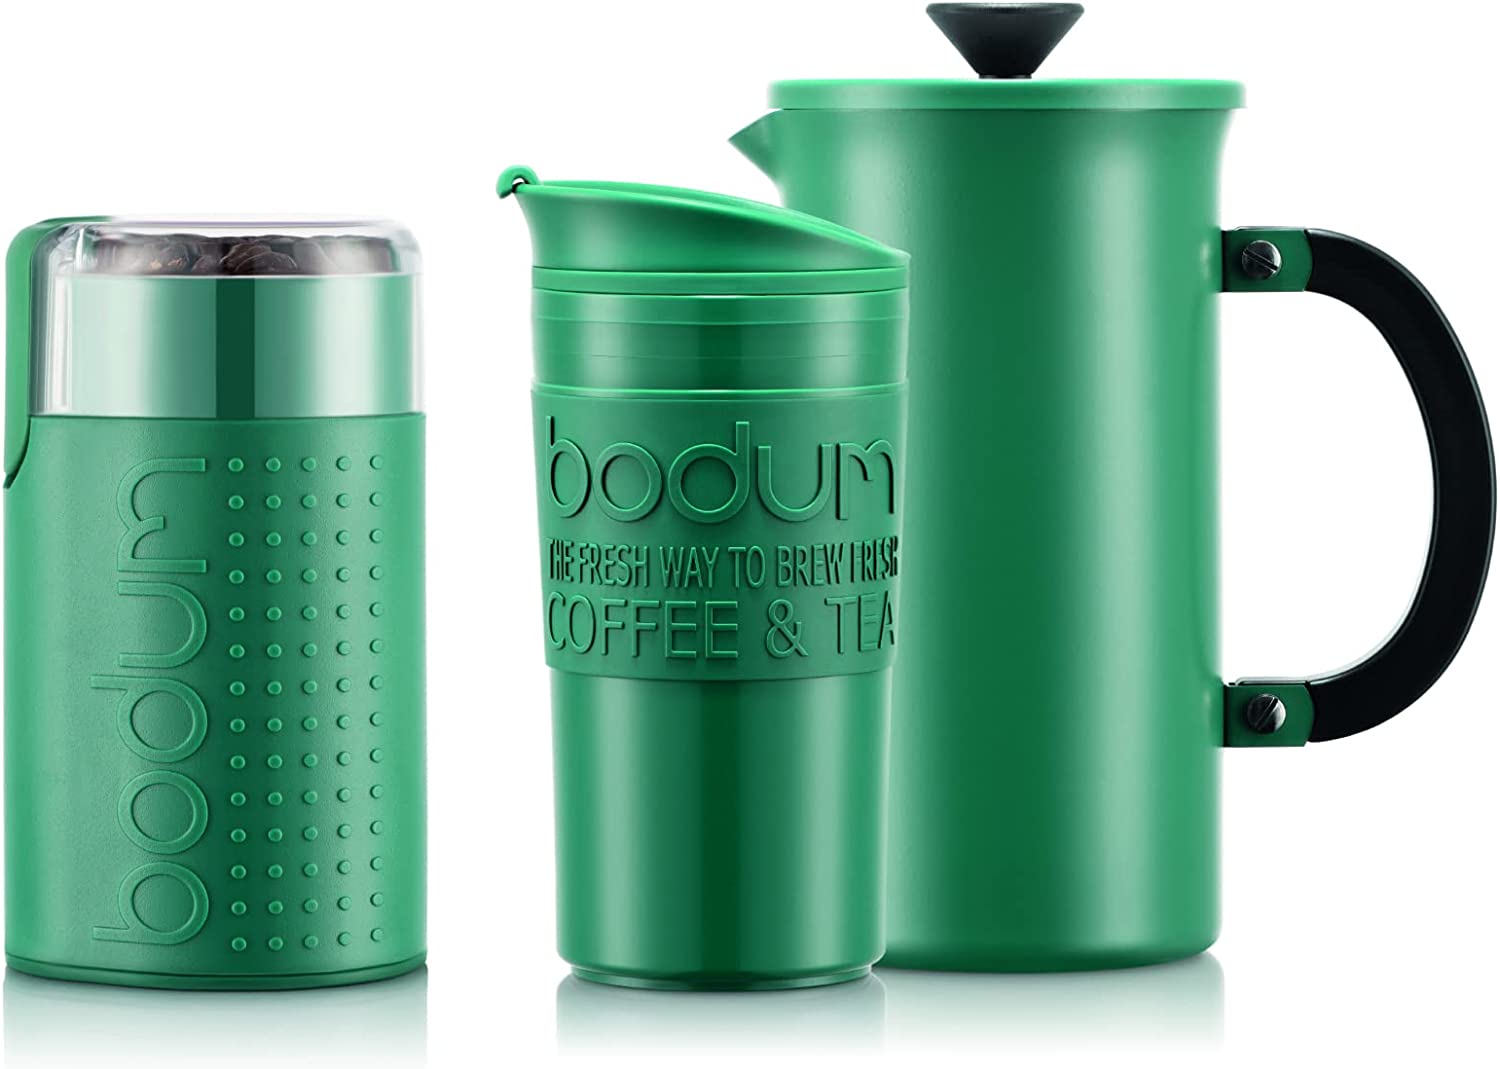 Bodum Tribute Set K11352-450EURO Cafetiere Coffee Maker 8 Cups / 1.0 L Travel Mug and Coffee Grinder